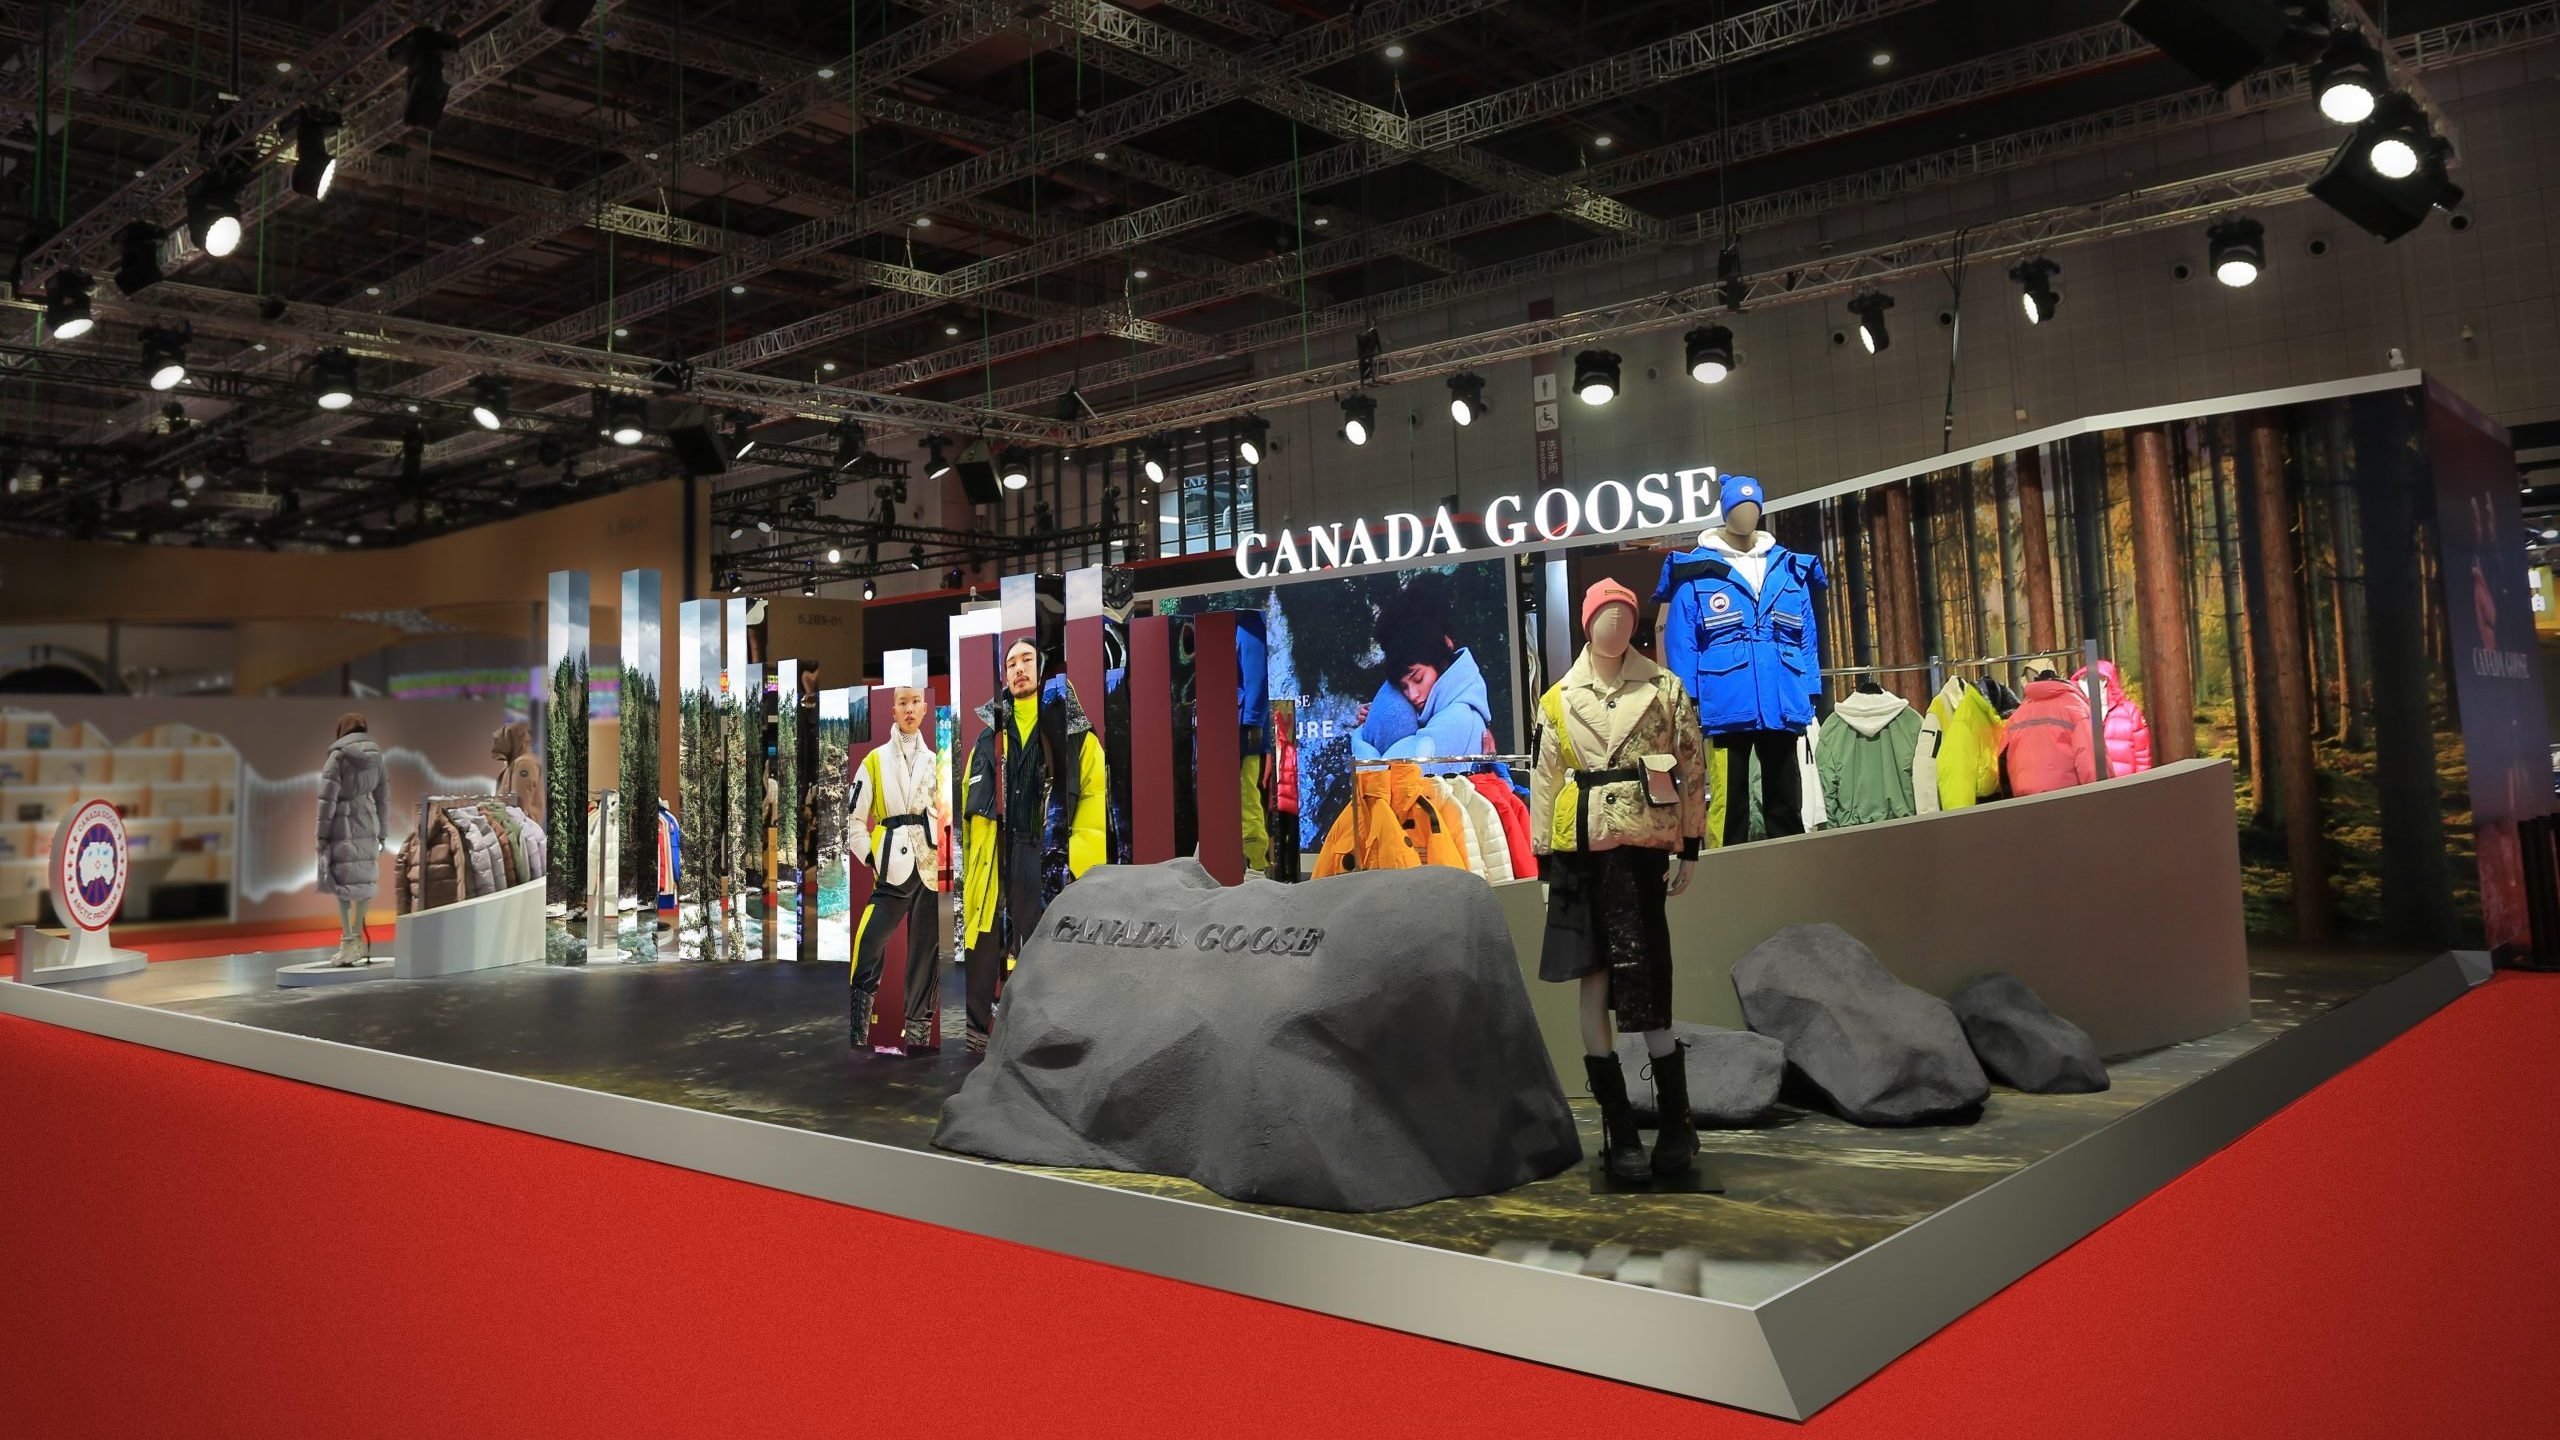 In less than five years Canada Goose turned China into one of its largest markets. Larry Li, China President, shares their key strategic moves in the Chinese market. Image Courtesy of Canada Goose